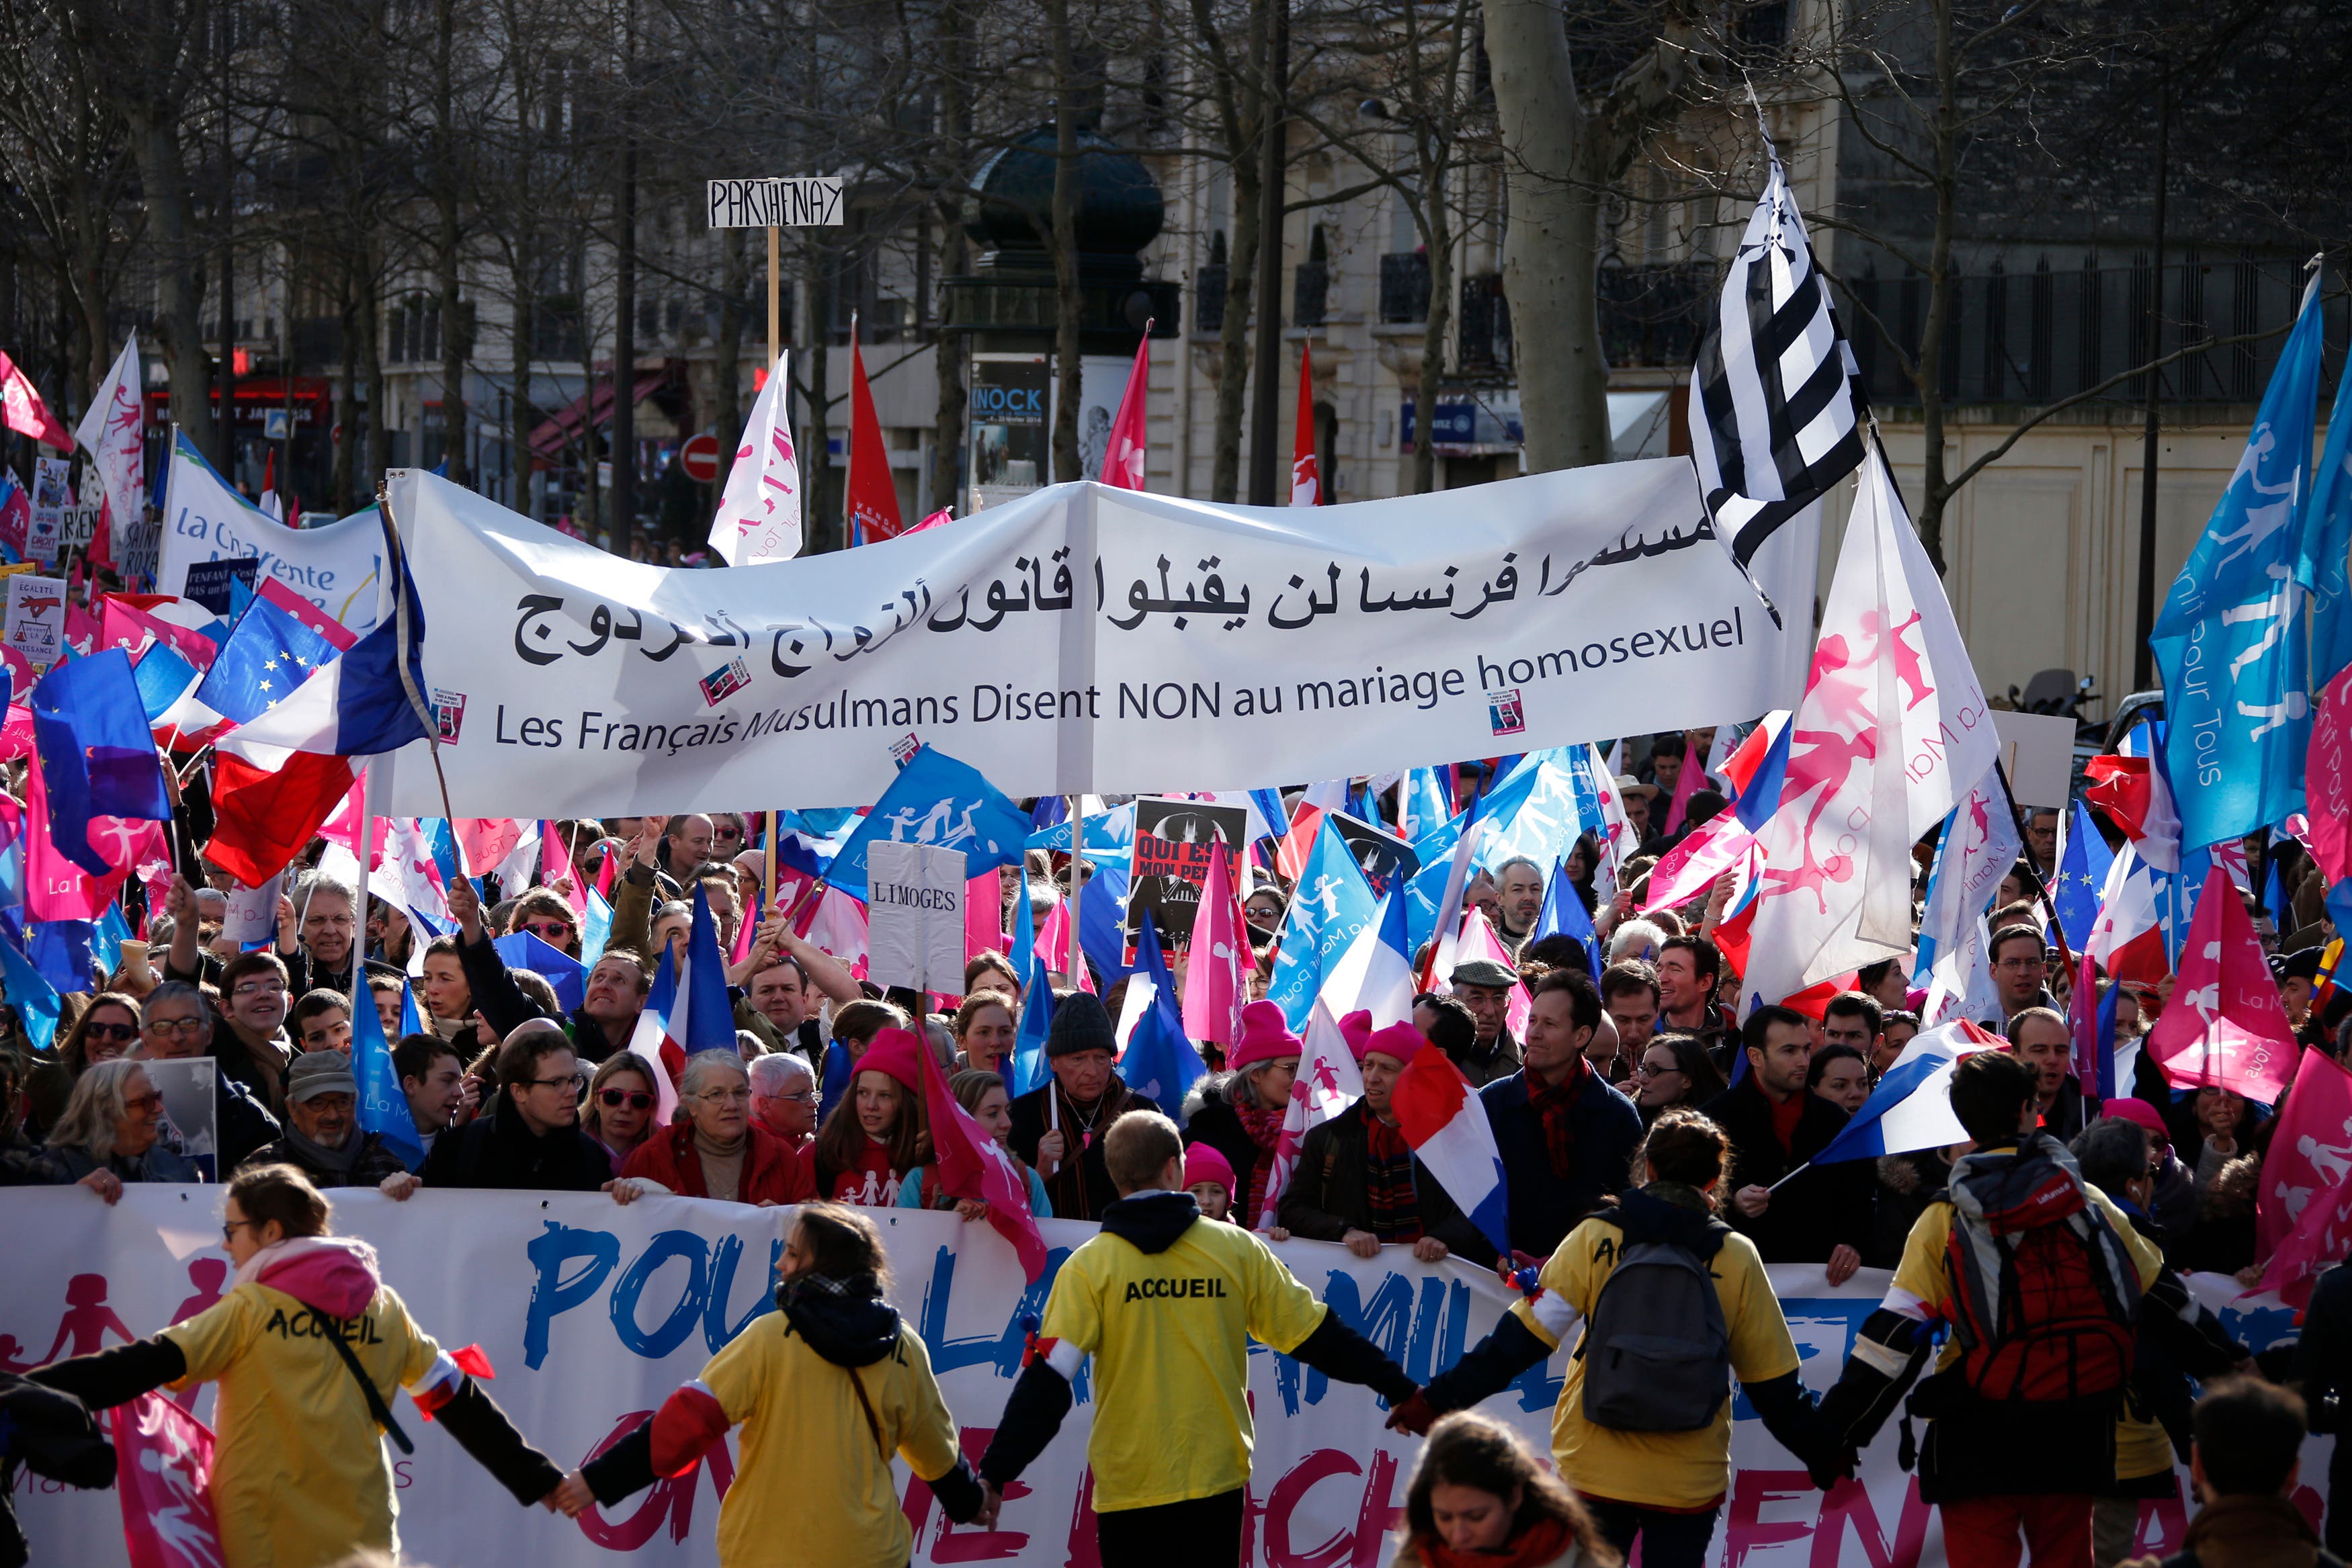 Supporters of gay marriage in France include some Muslims Al Arabiya English